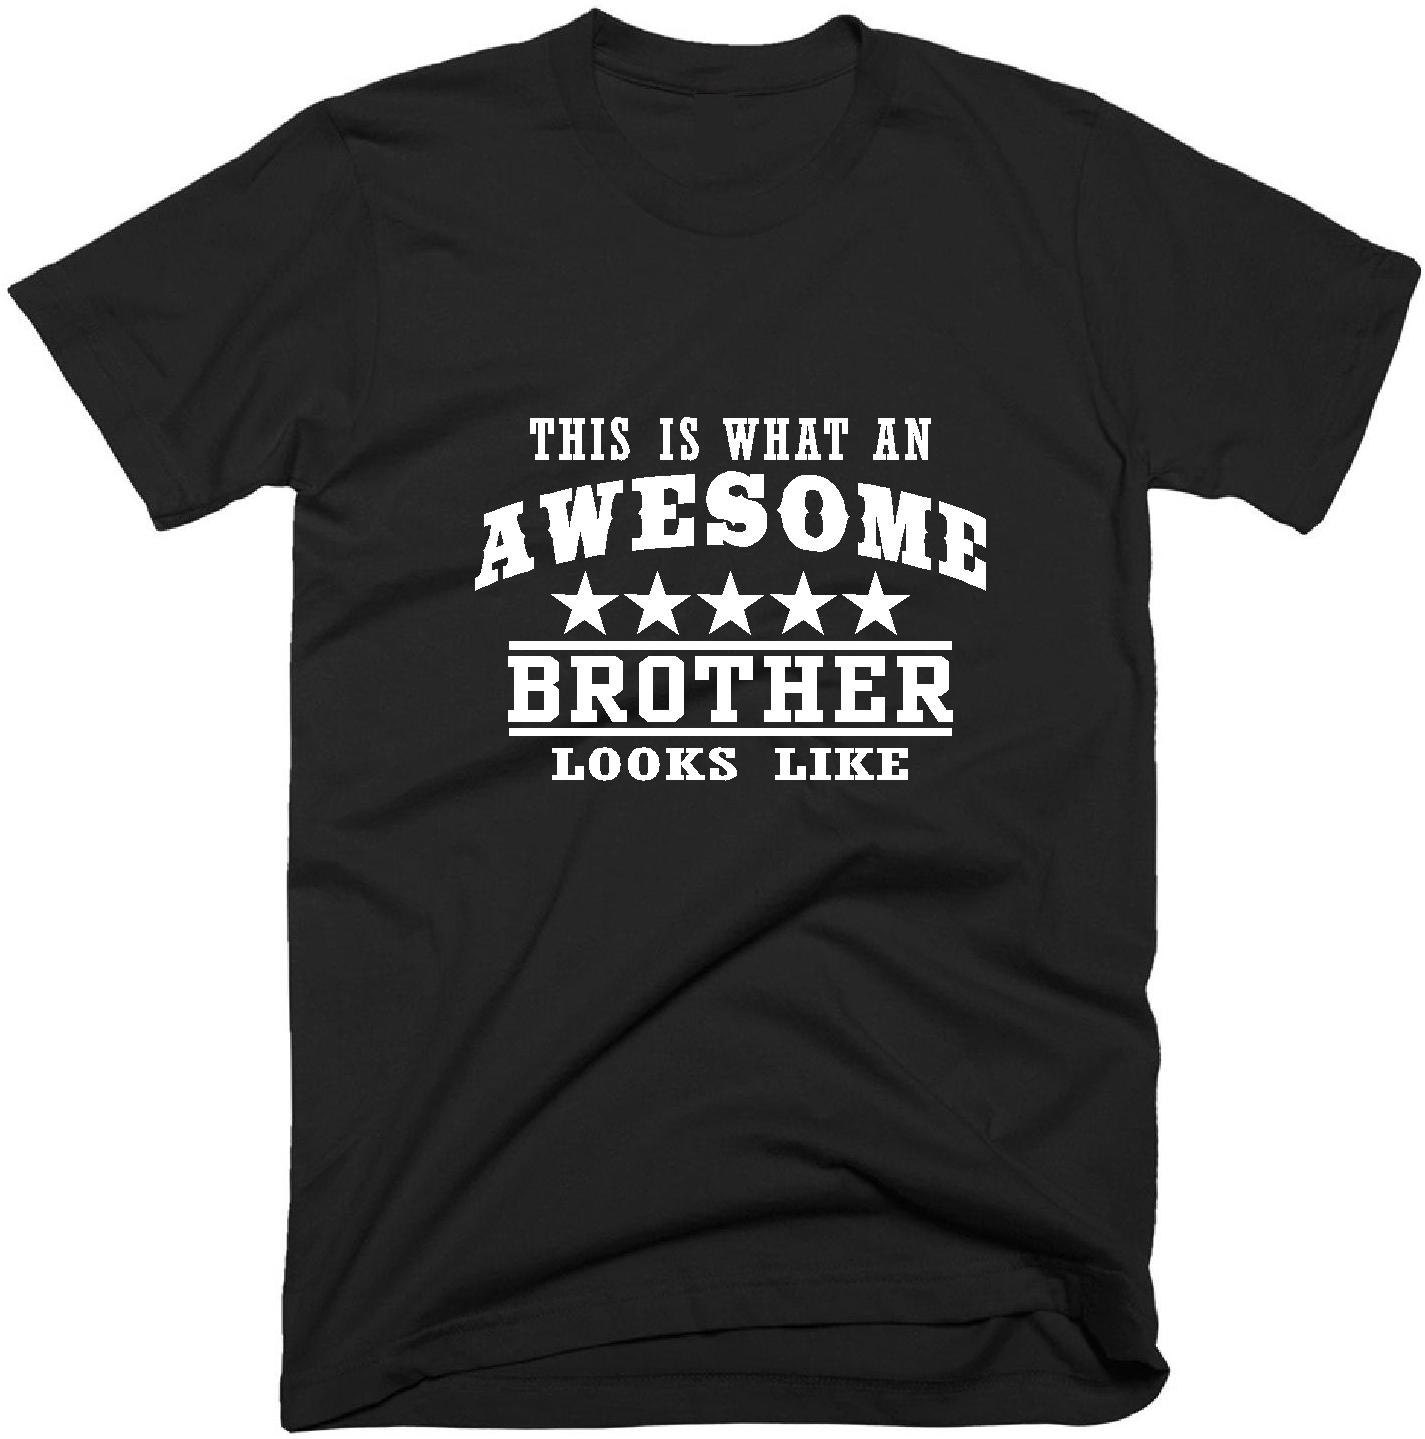 This Is What An Awesome Brother Looks Like TShirt Awesome